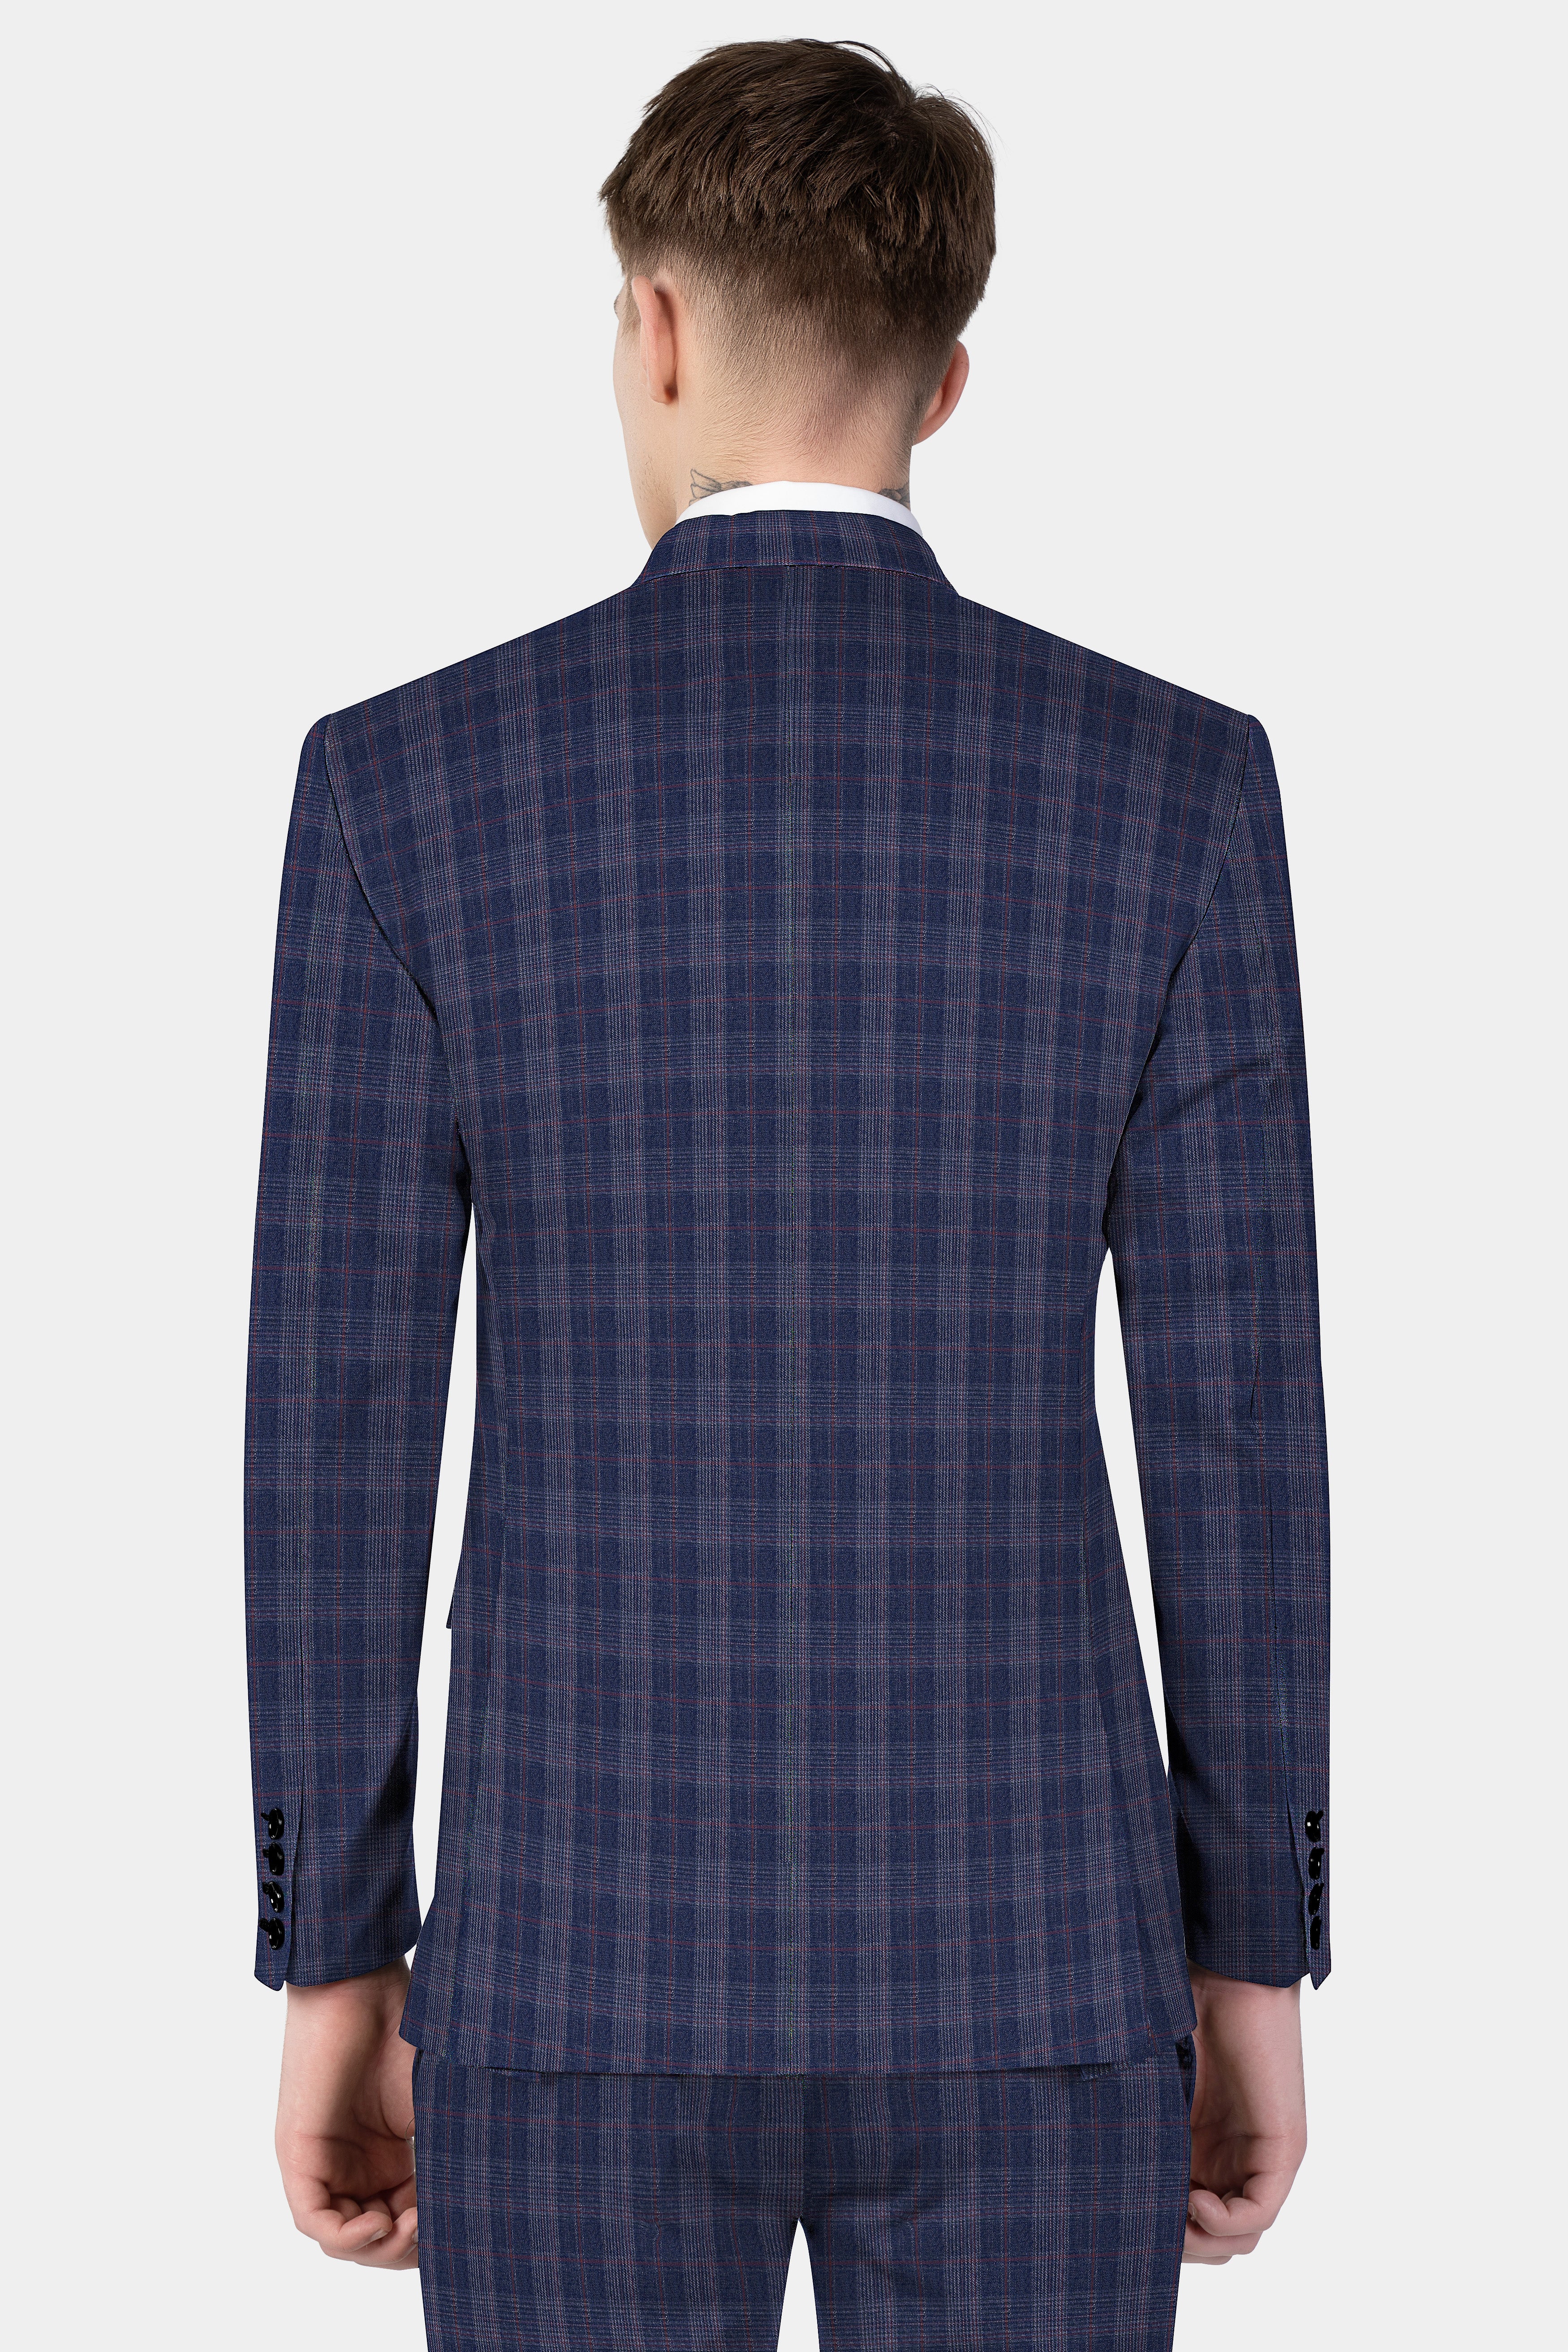 Tuna Blue Checkered Wool Blend Double Breasted Suit